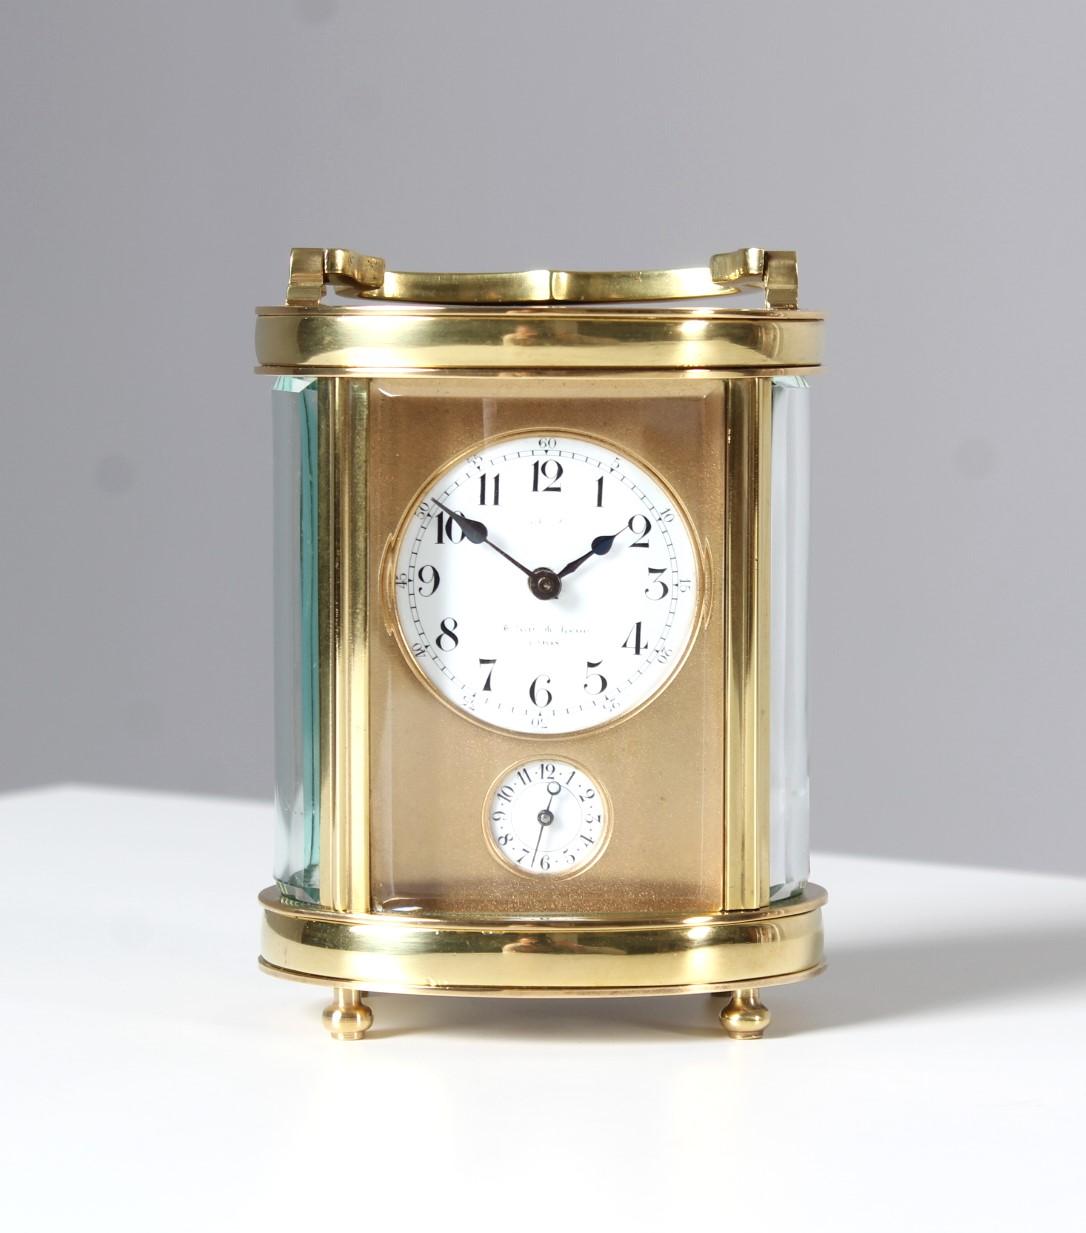 Dimensions: H x W x D: 16 x 9 x 7 cm

The height is measured with handle. Without handle it is 12 cm in height.

Beautiful antique carriage clock or officer's clock.
Rare oval shape. 
Alarm time is set by the lower dial. To wake up the clock strikes